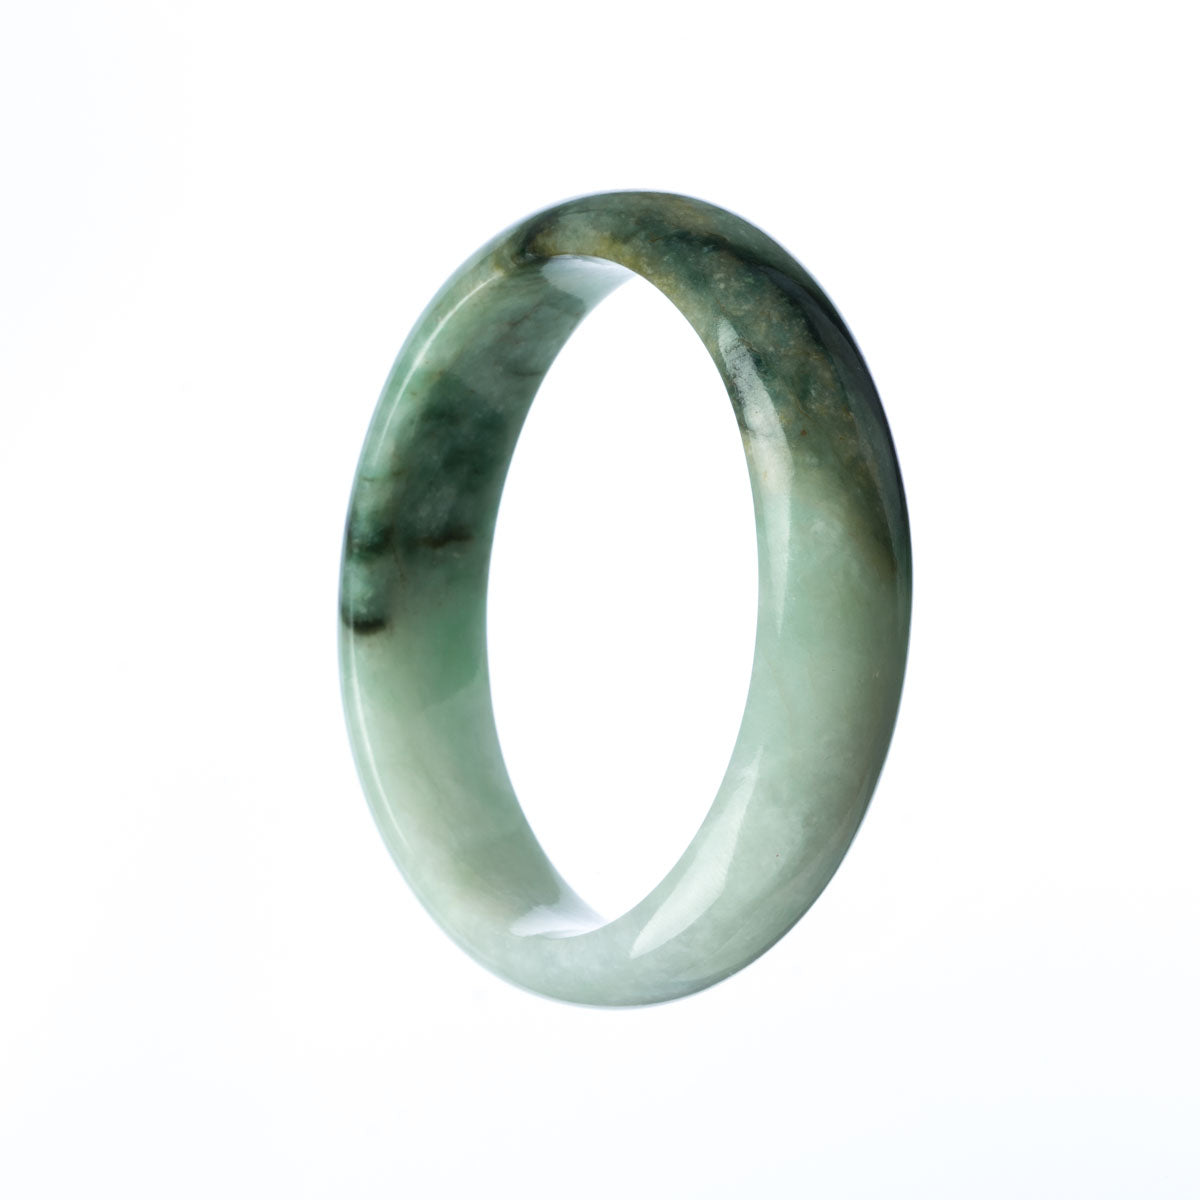 A close-up photo of a beautiful green bracelet made with genuine Type A Green Burma Jade. The bracelet has an oval shape and measures 59mm in size. The brand name "MAYS" is written in small letters.